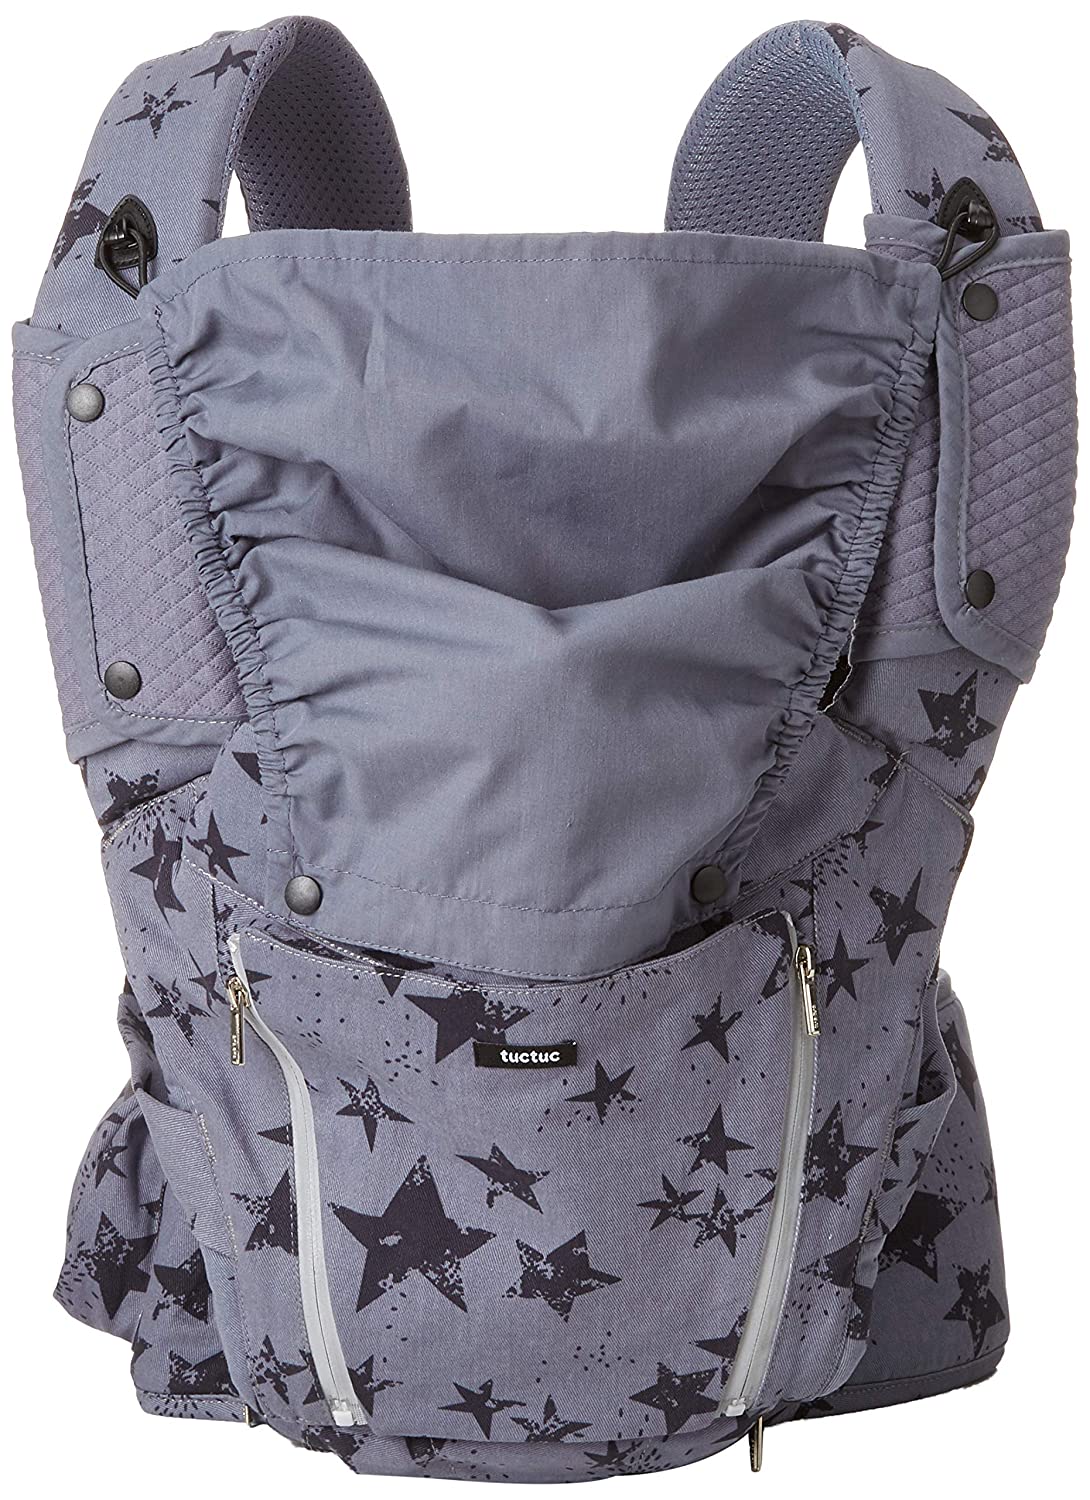 Tuc Tuc Circus 4789 Hip Seat Baby Carrier Grey